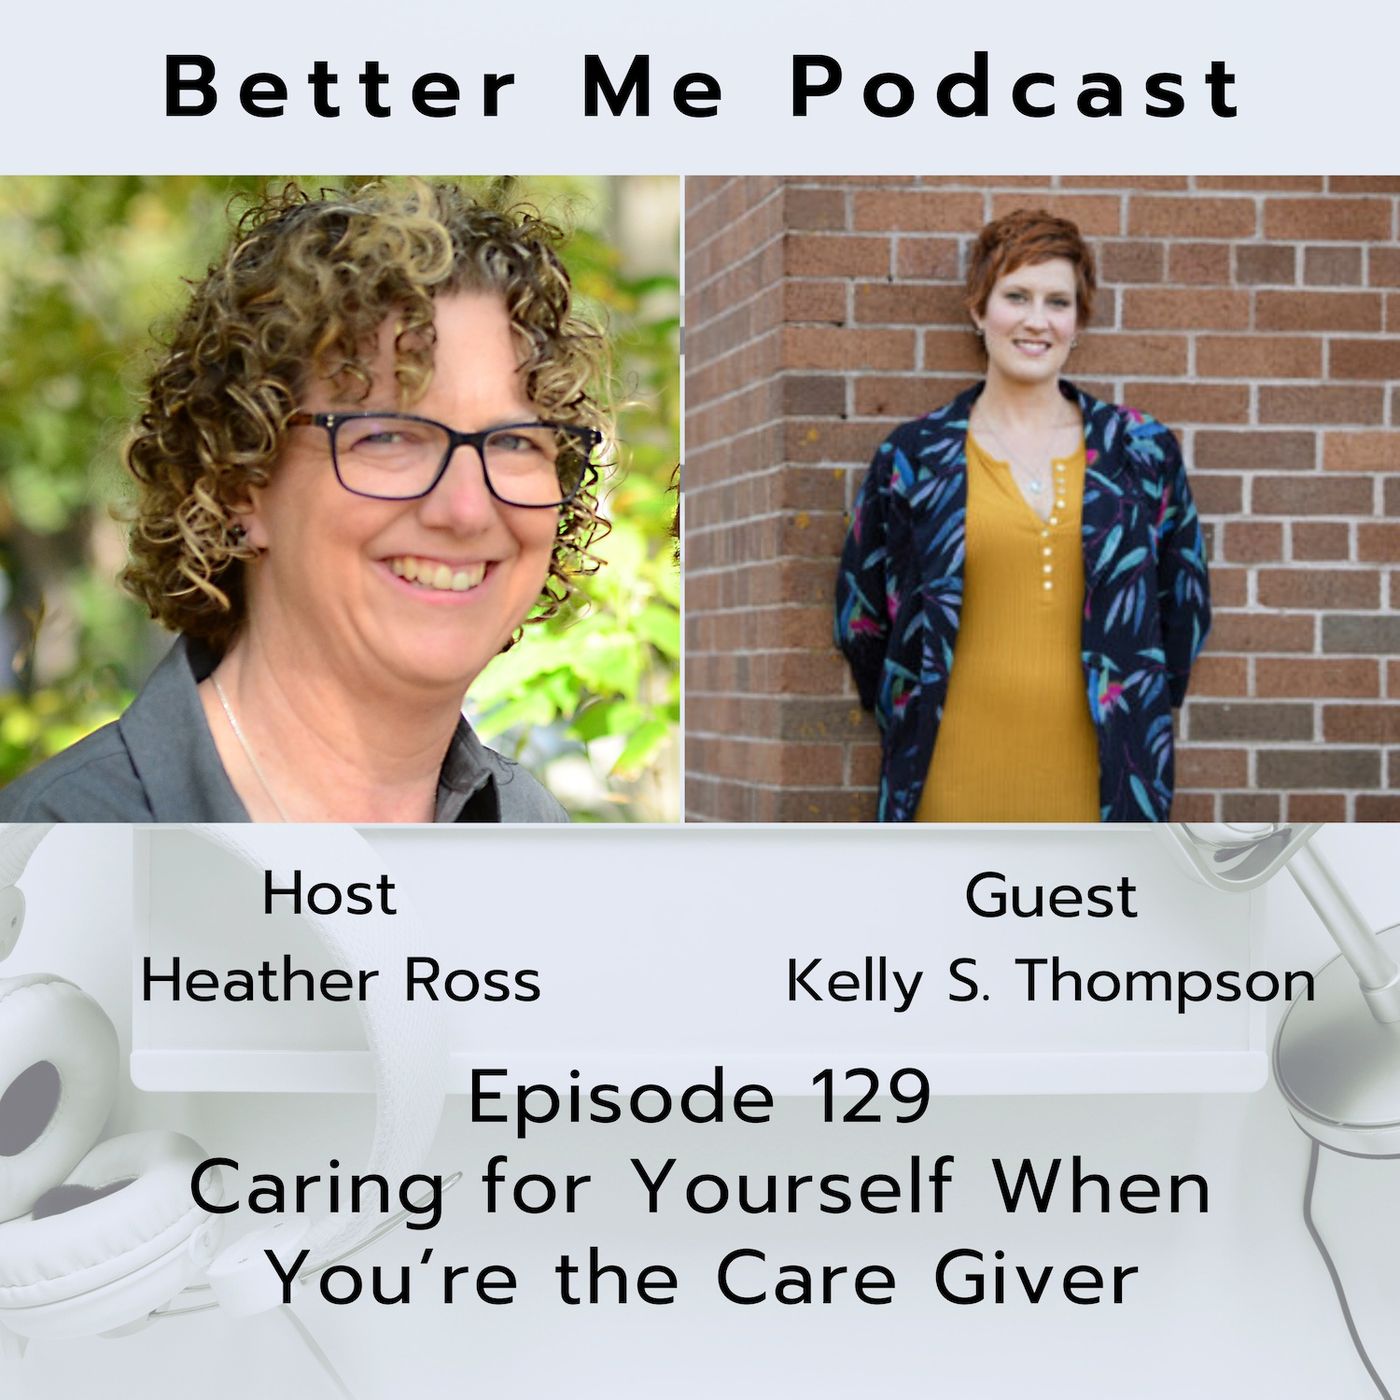 EP 129 Caring For Yourself When You're the Caregiver (with guest Kelly S. Thompson)